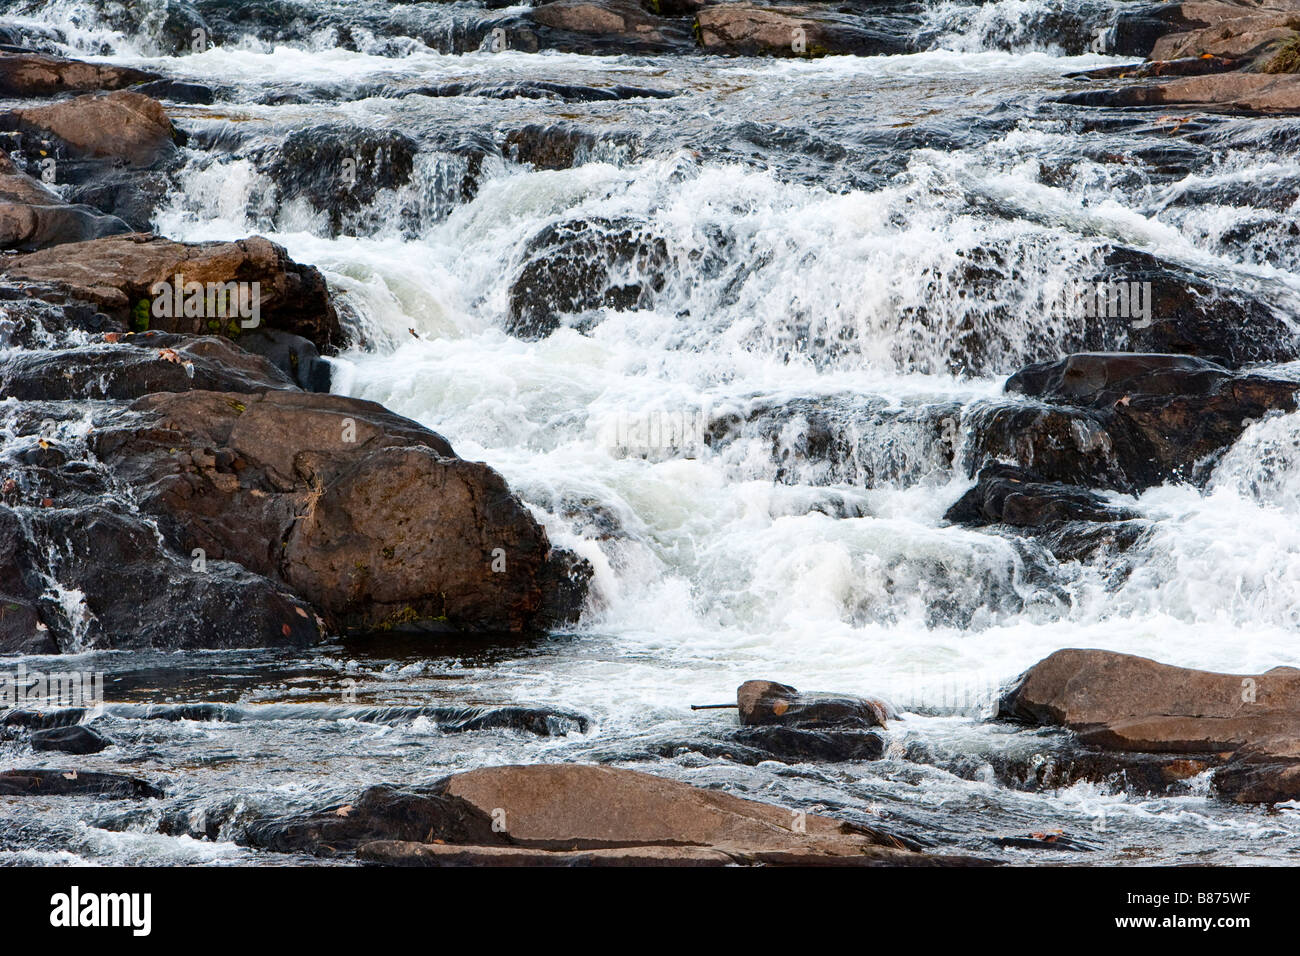 Whitewater clowing over rocks in Vermont October 10 2008 Stock Photo